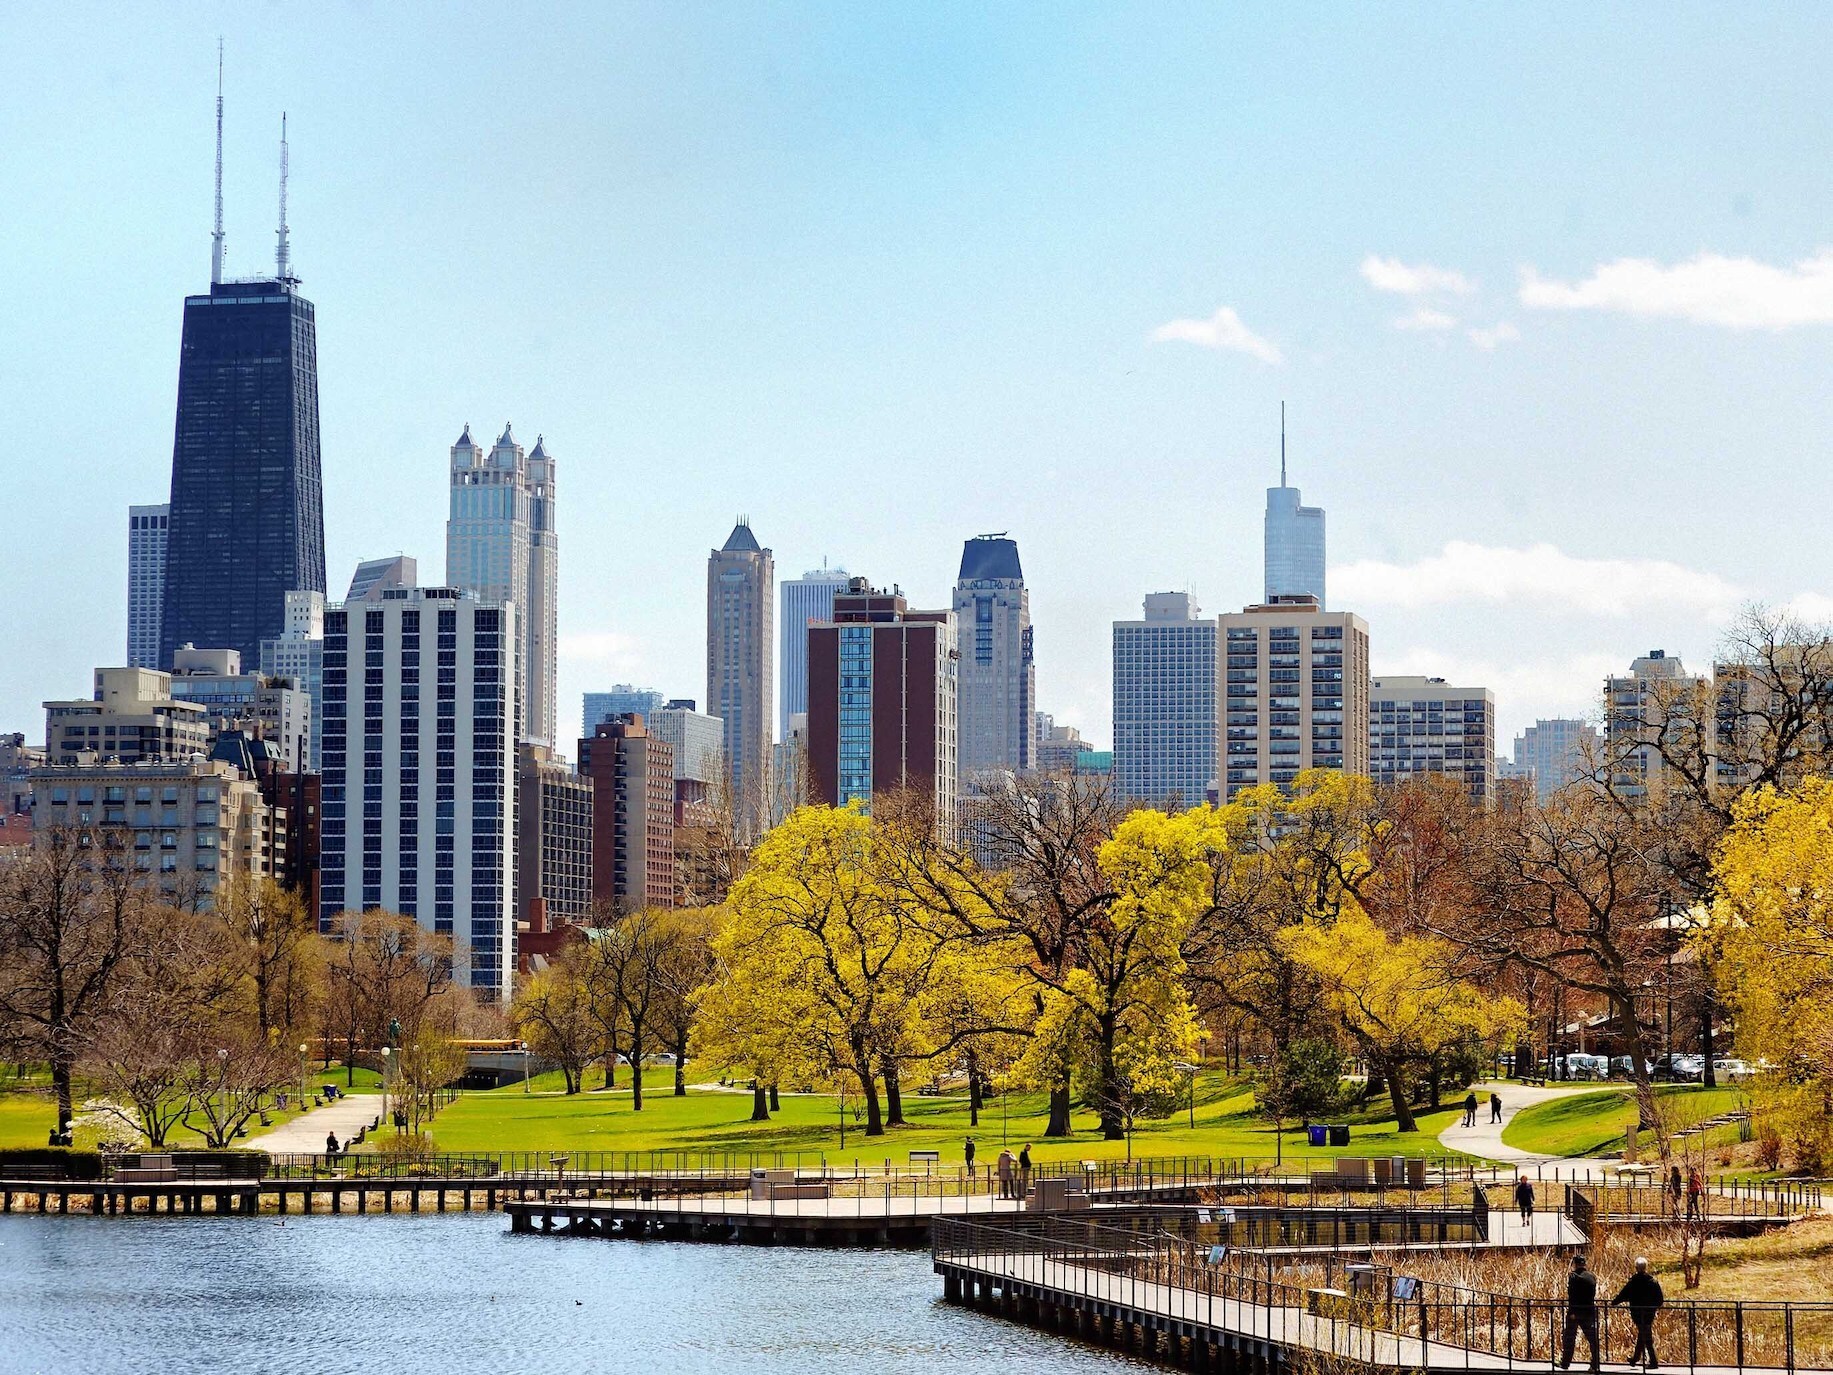 Explore Lincoln Park Chicago with Skydeck: Attractions, Hotels and More